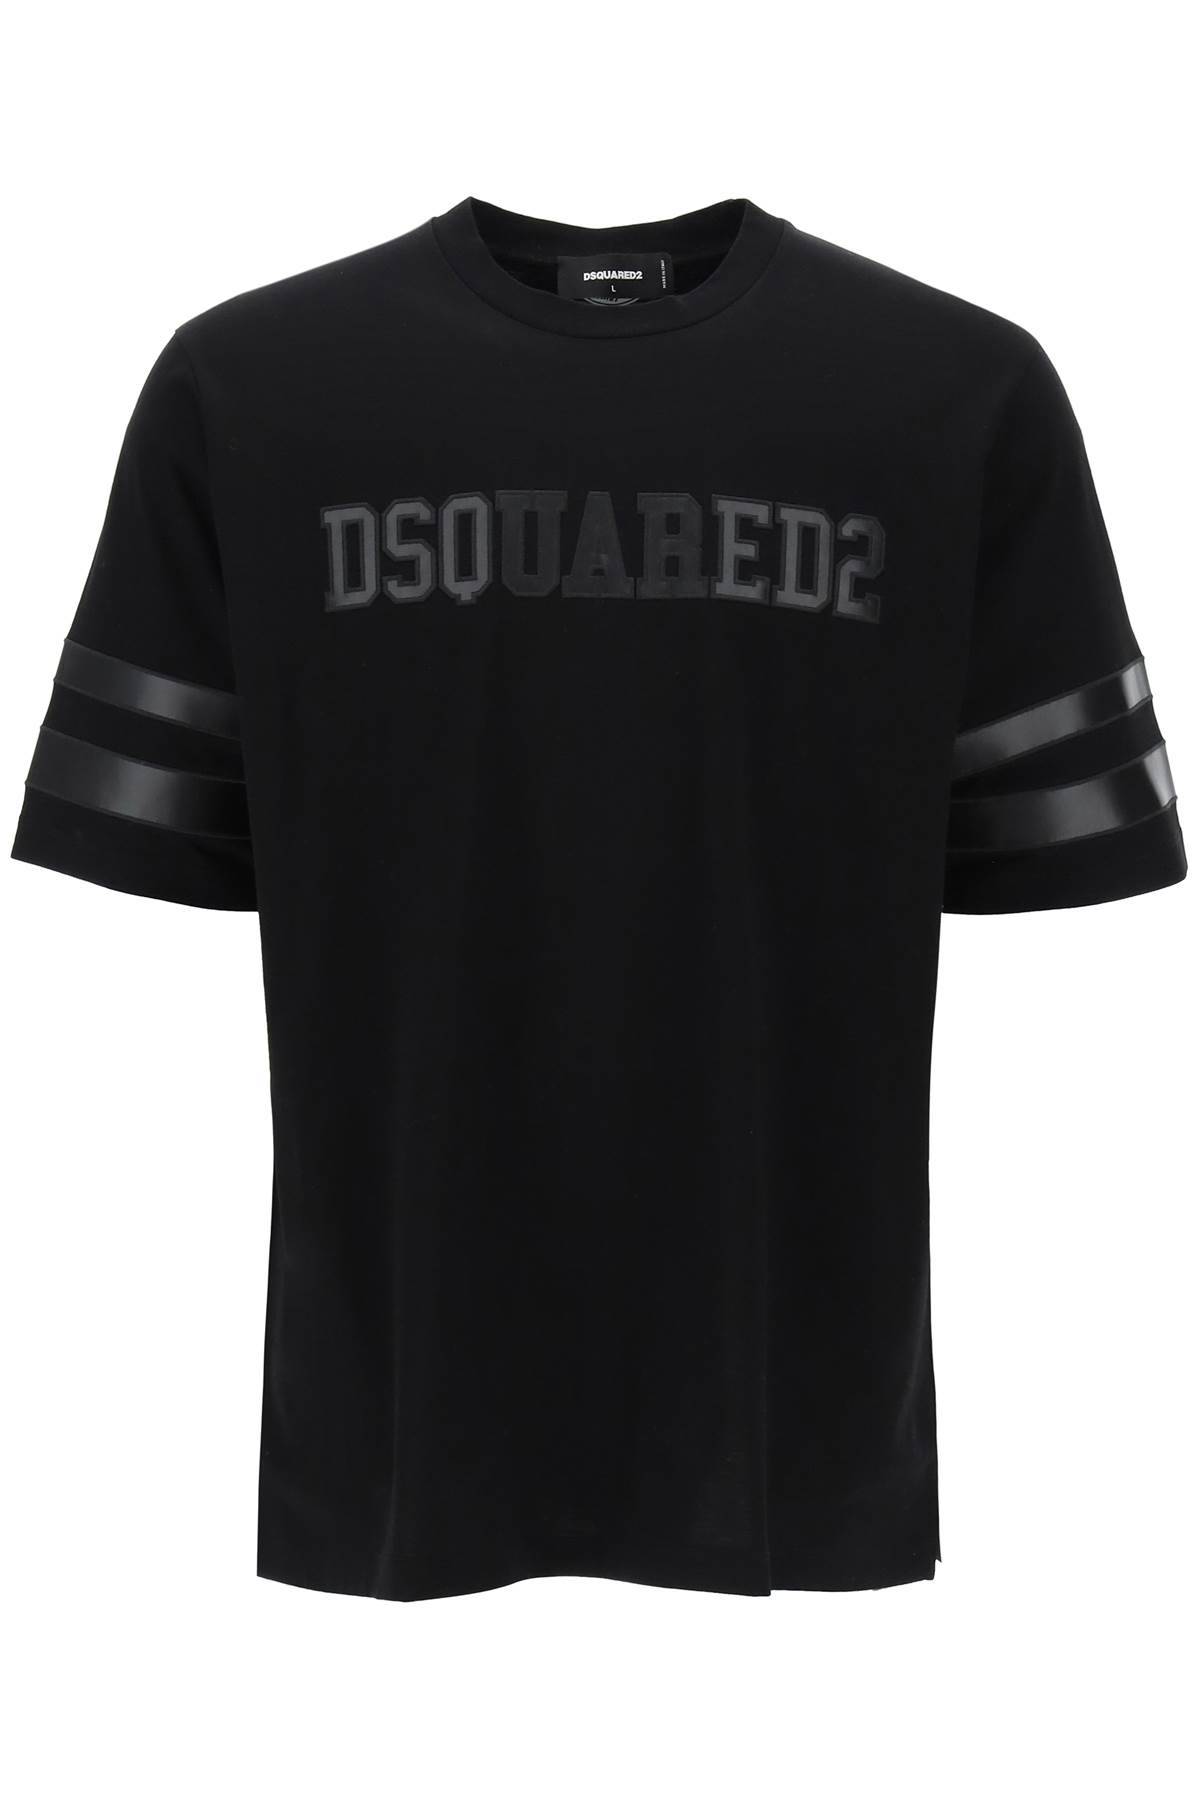 Dsquared2 DSQUARED2 t-shirt with faux leather inserts